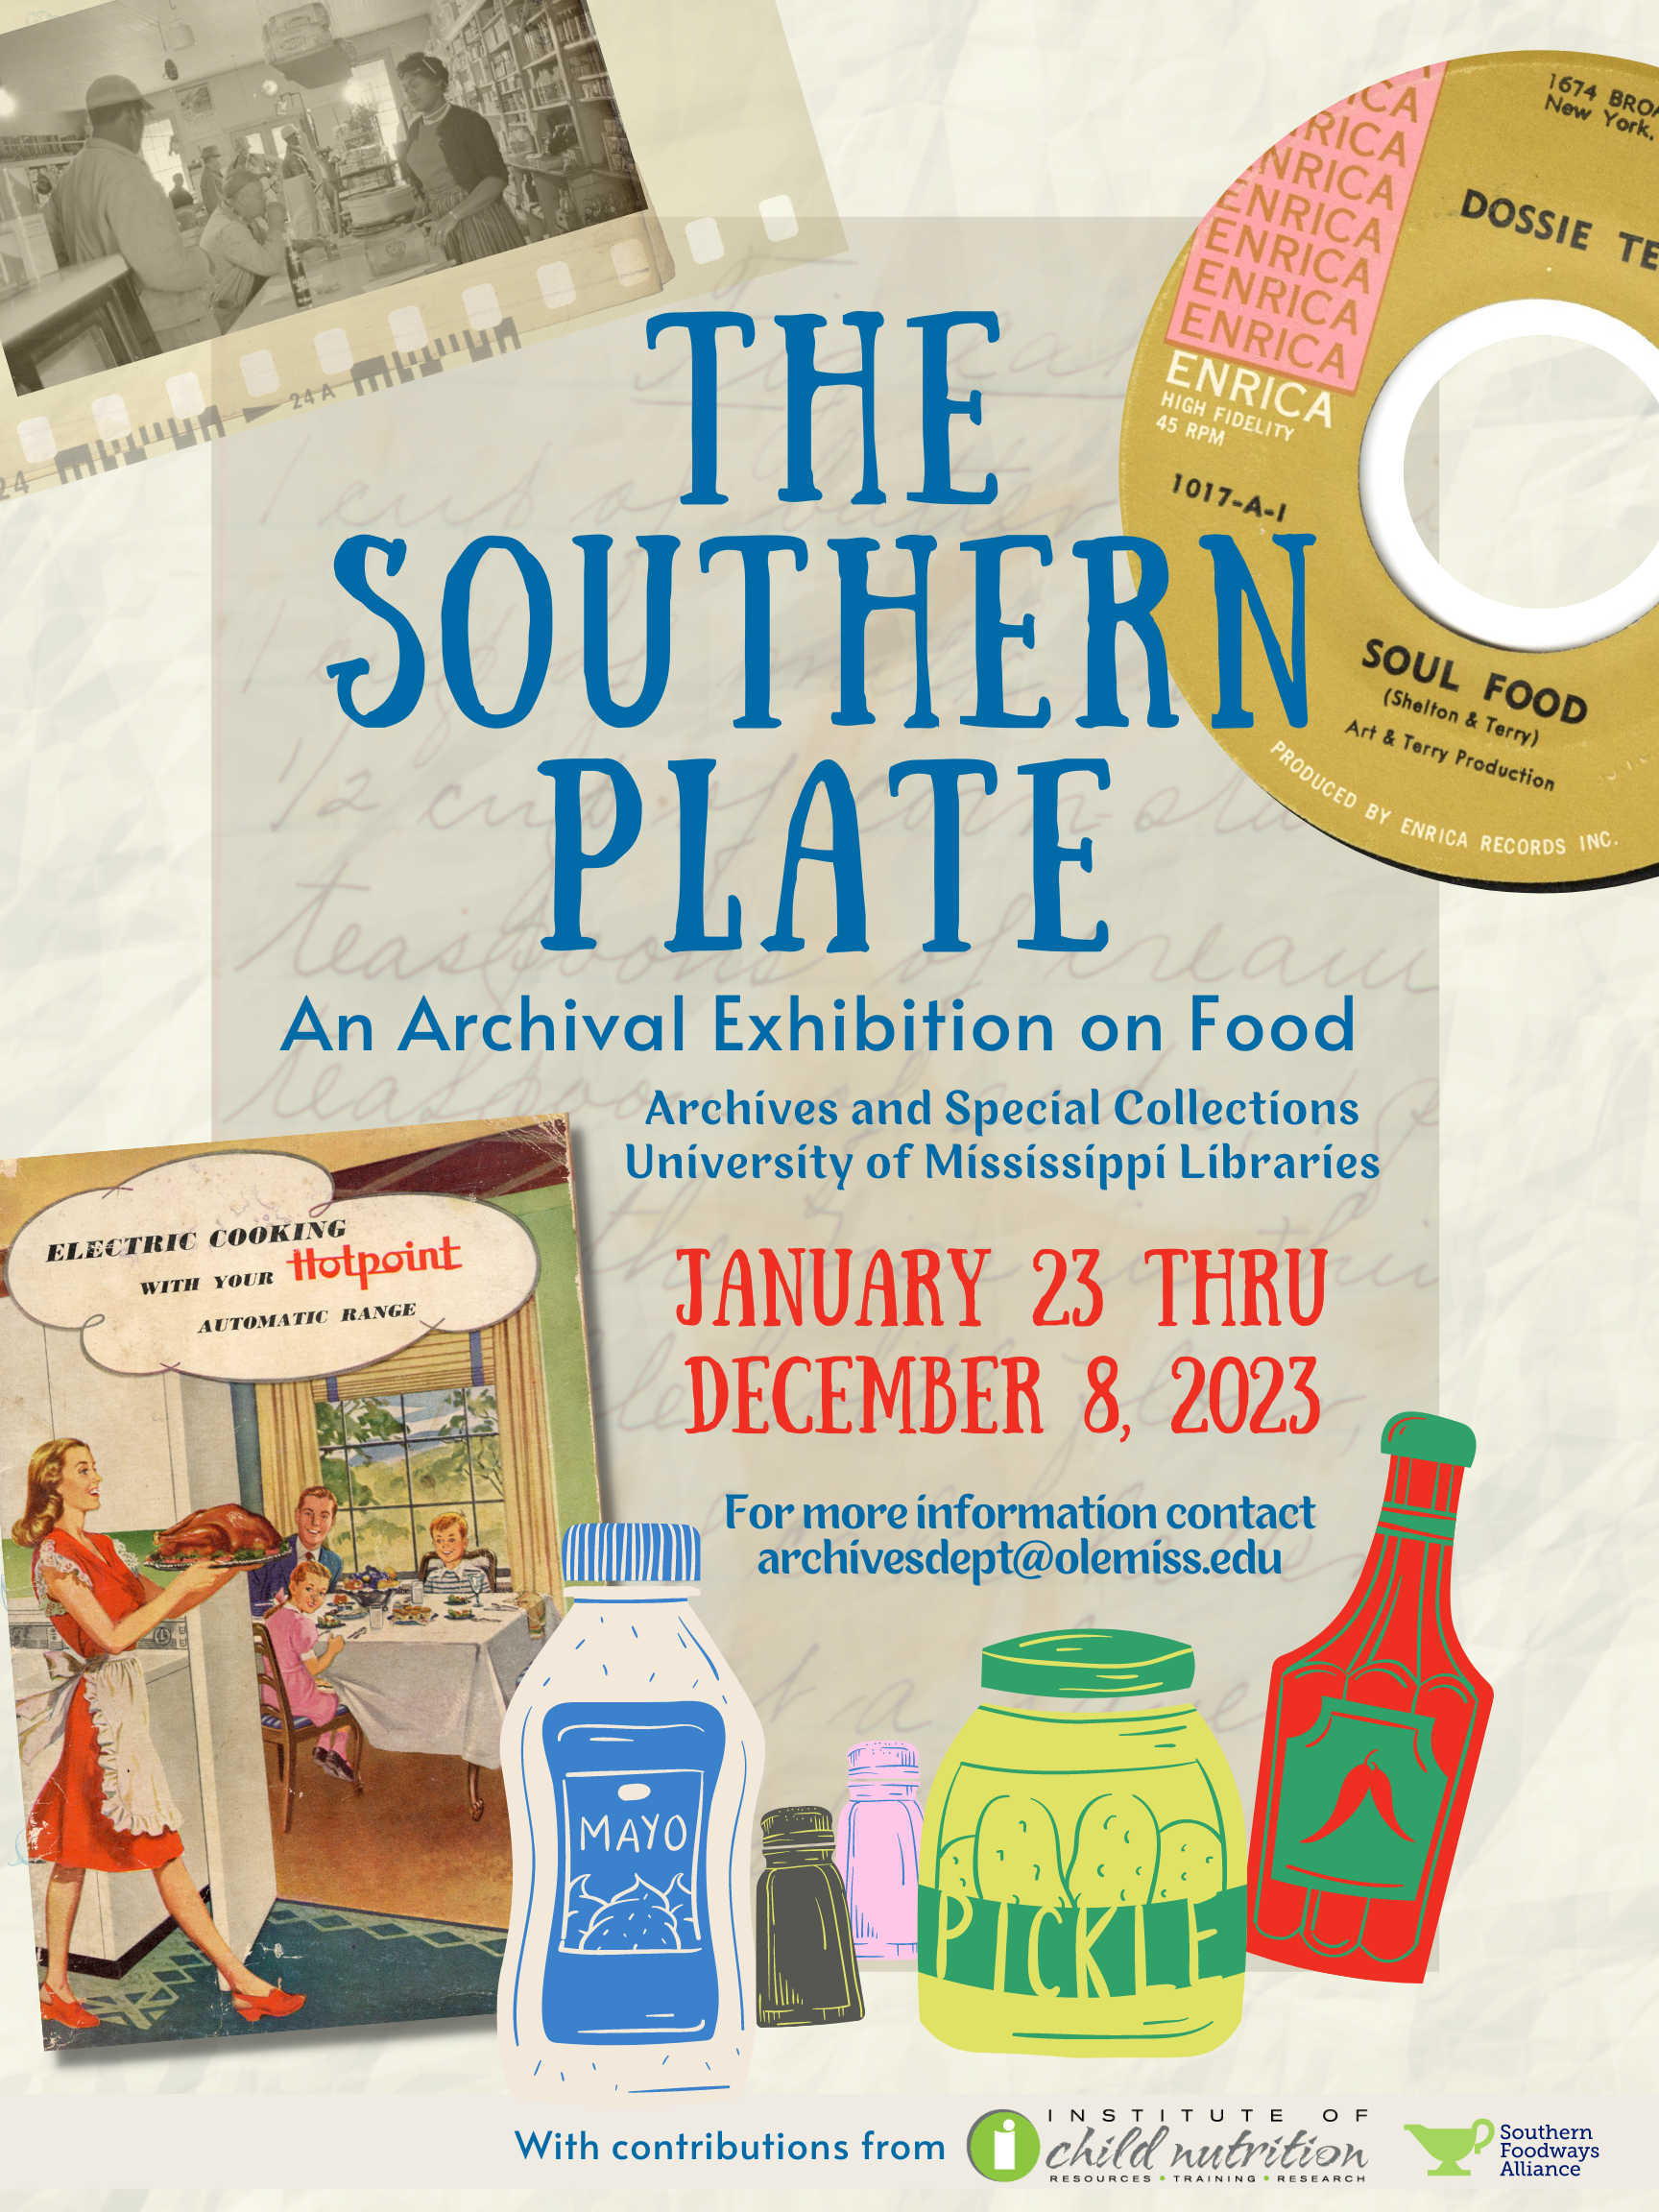 The Southern Plate: An Archival Exhibition on Food